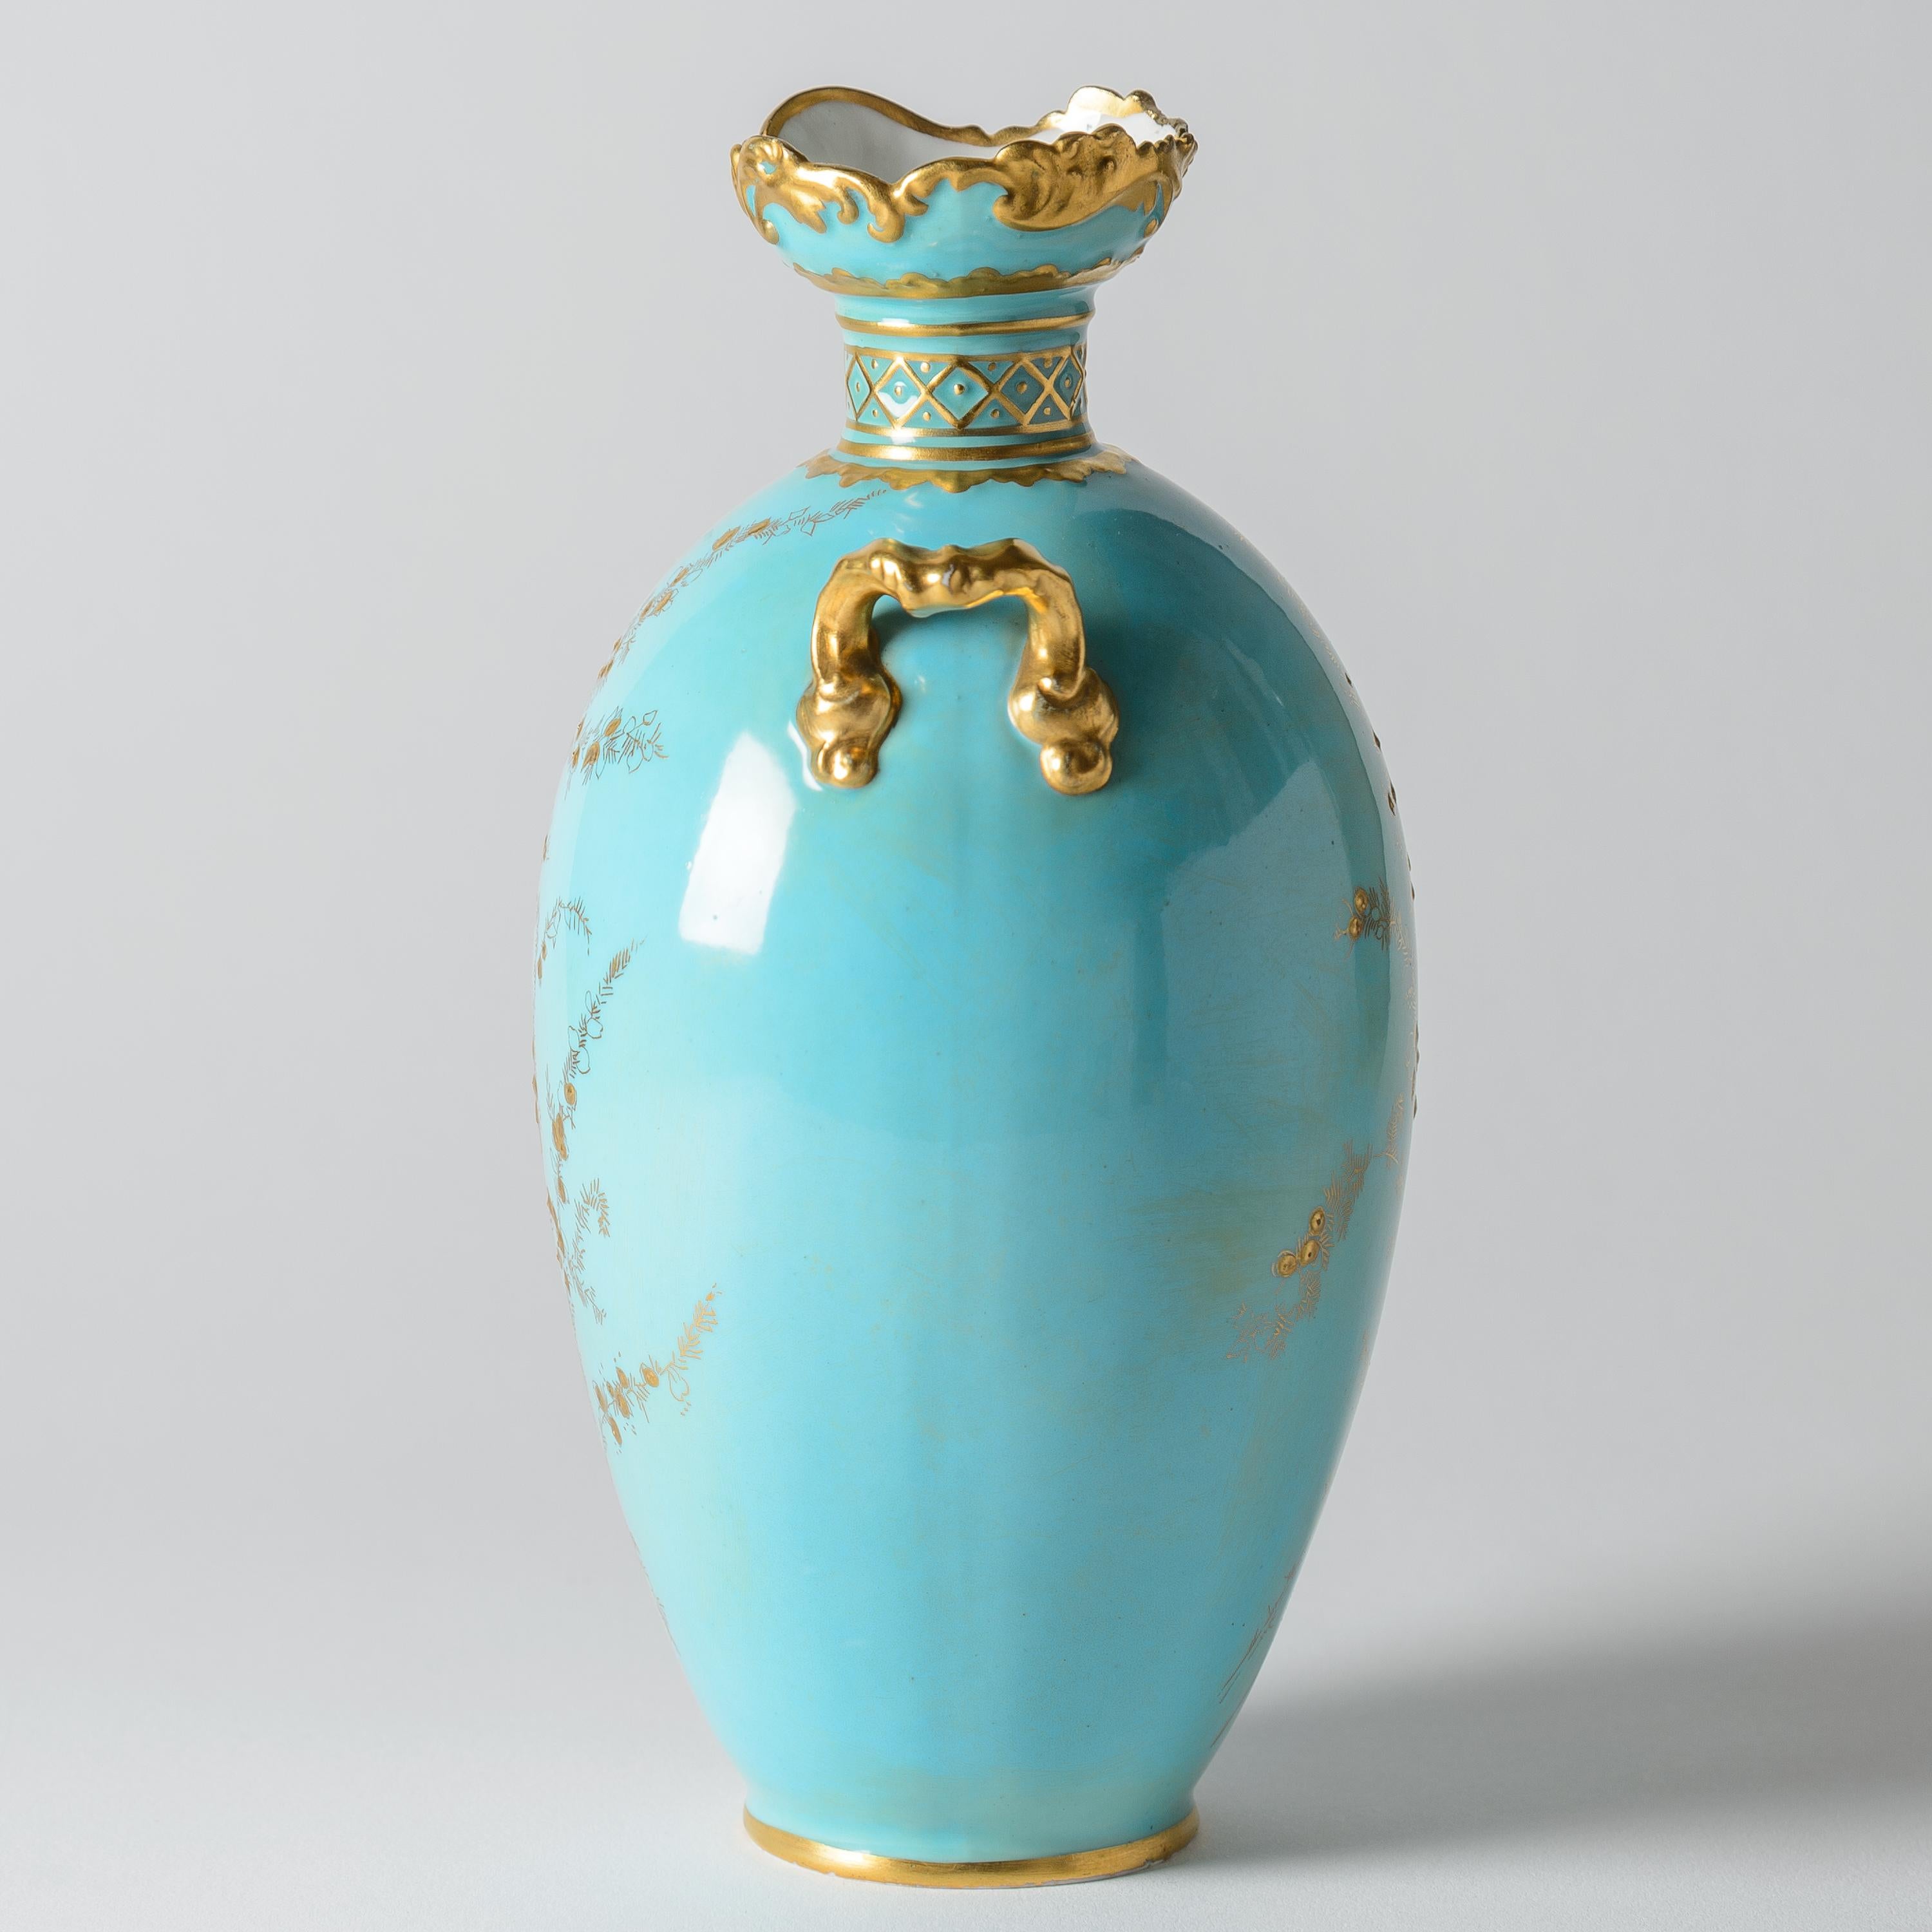 A vibrant turquoise and raised paste gilded vase by one of England's finest porcelain factories: Royal Crown Derby. Lovely details to the handles and slight ruffle edge top. Retailed by one of Boston's prestigious Gilded Age shops Shreve Crump and